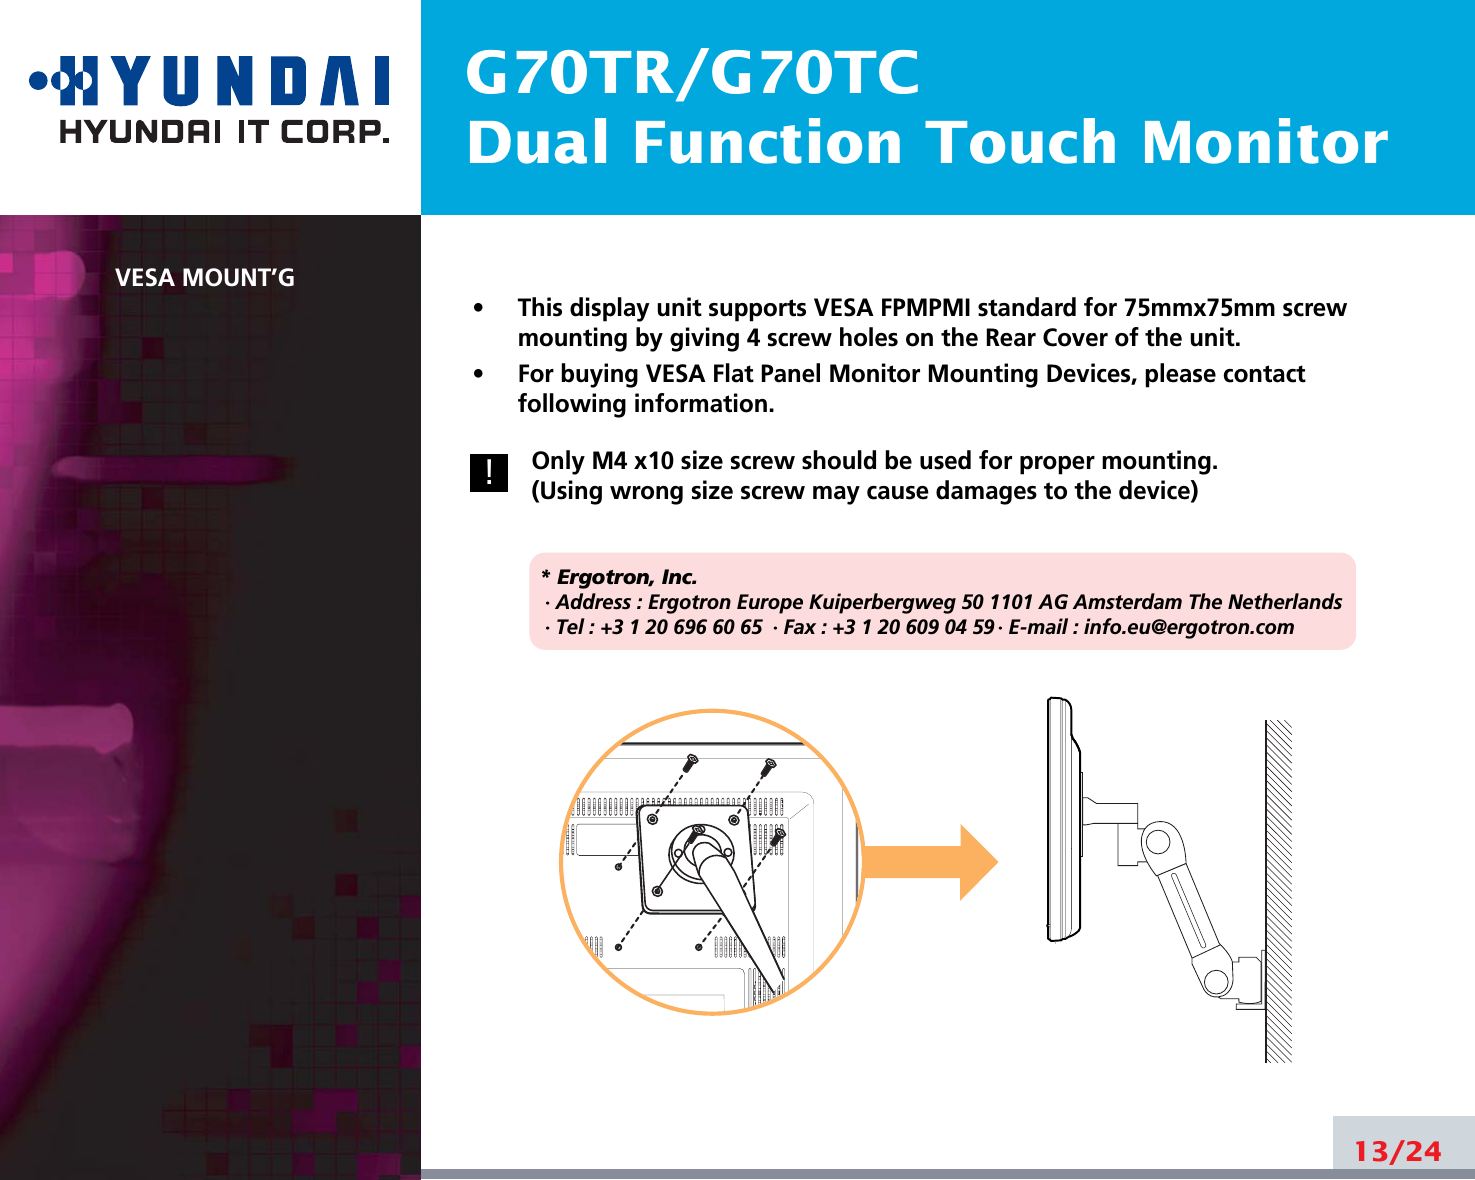 G70TR/G70TCDual Function Touch MonitorVESA MOUNT’G•     This display unit supports VESA FPMPMI standard for 75mmx75mm screwmounting by giving 4 screw holes on the Rear Cover of the unit.•     For buying VESA Flat Panel Monitor Mounting Devices, please contactfollowing information.Only M4 x10 size screw should be used for proper mounting.(Using wrong size screw may cause damages to the device)* Ergotron, Inc.· Address : Ergotron Europe Kuiperbergweg 50 1101 AG Amsterdam The Netherlands· Tel : +3 1 20 696 60 65 · Fax : +3 1 20 609 04 59 · E-mail : info.eu@ergotron.com13/24!